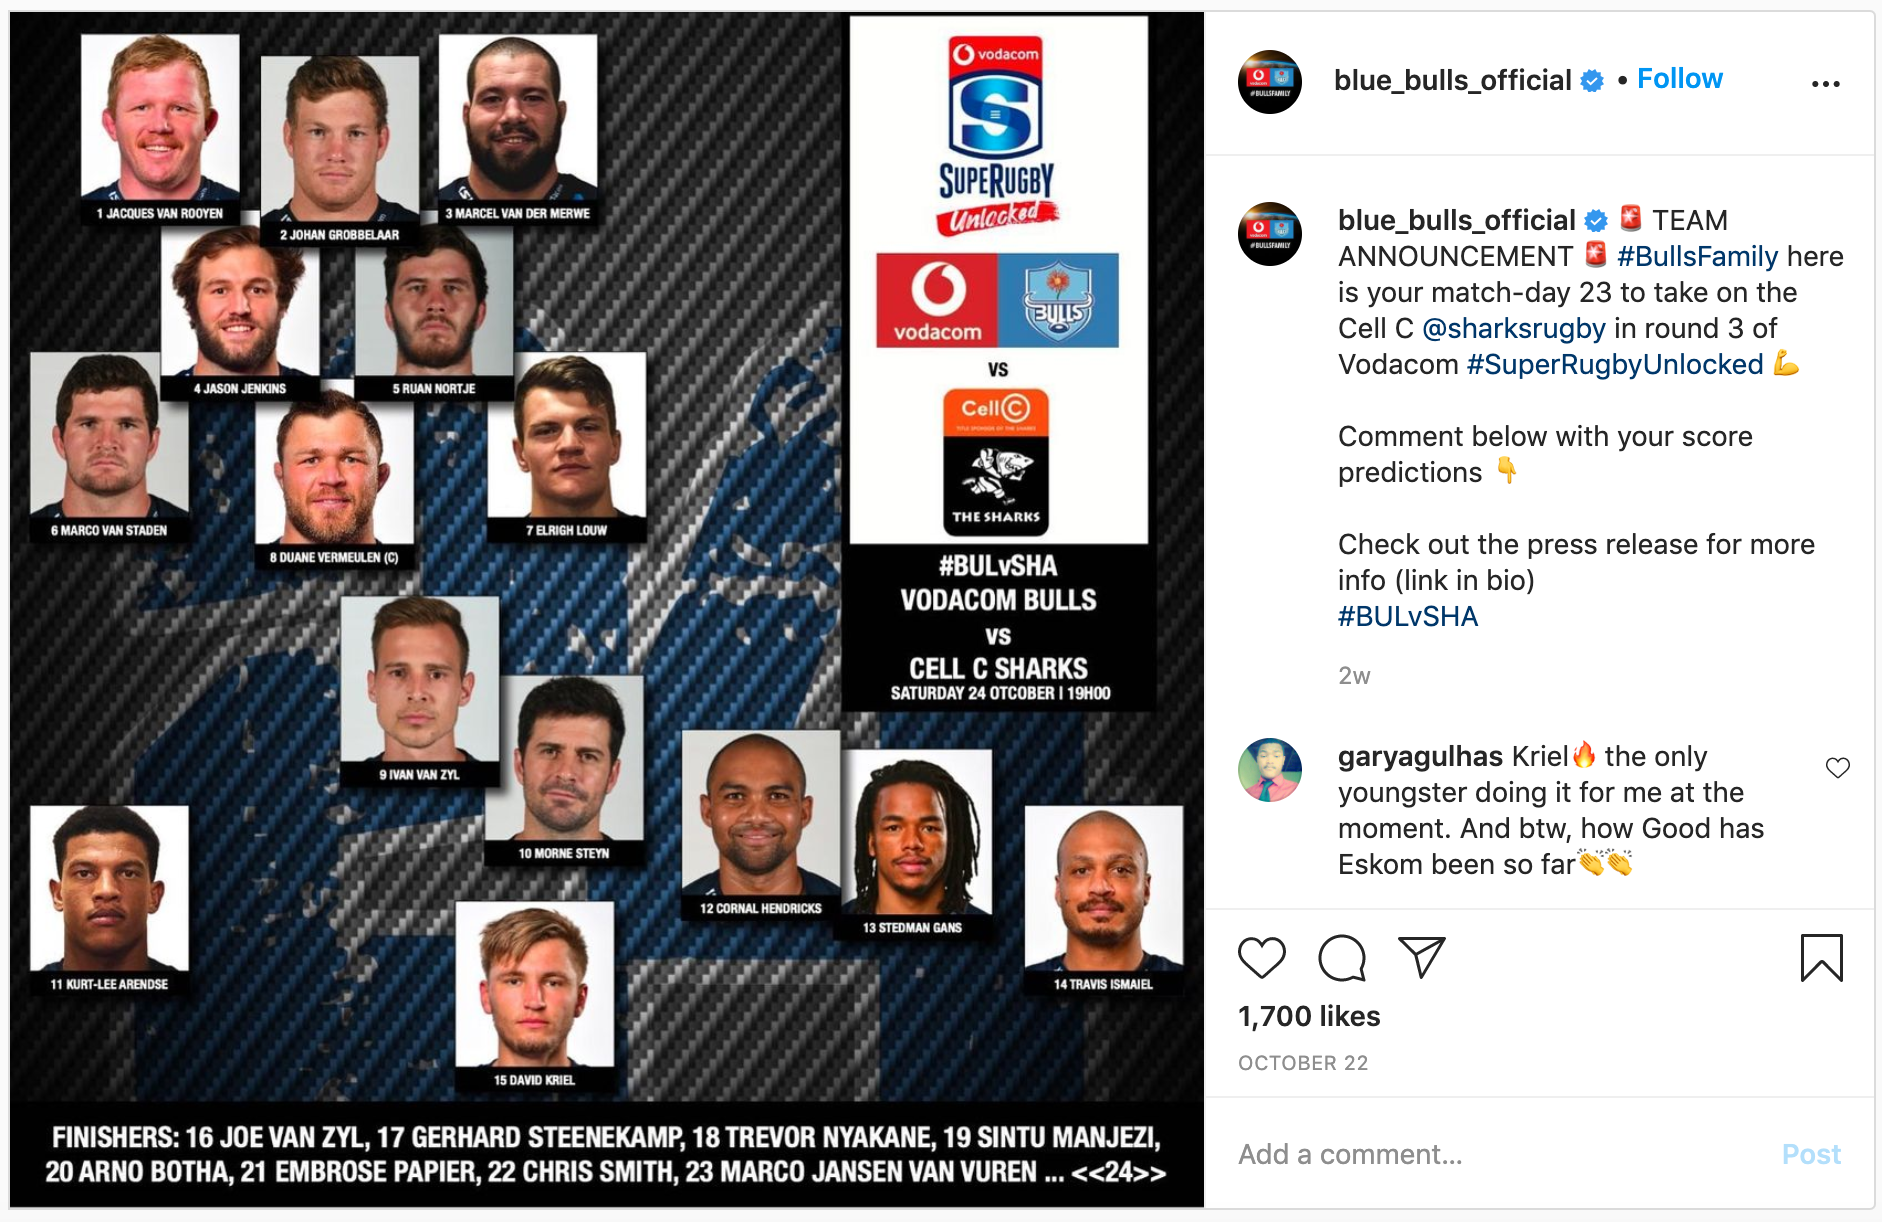 vodacom-rugby-instagram-mention